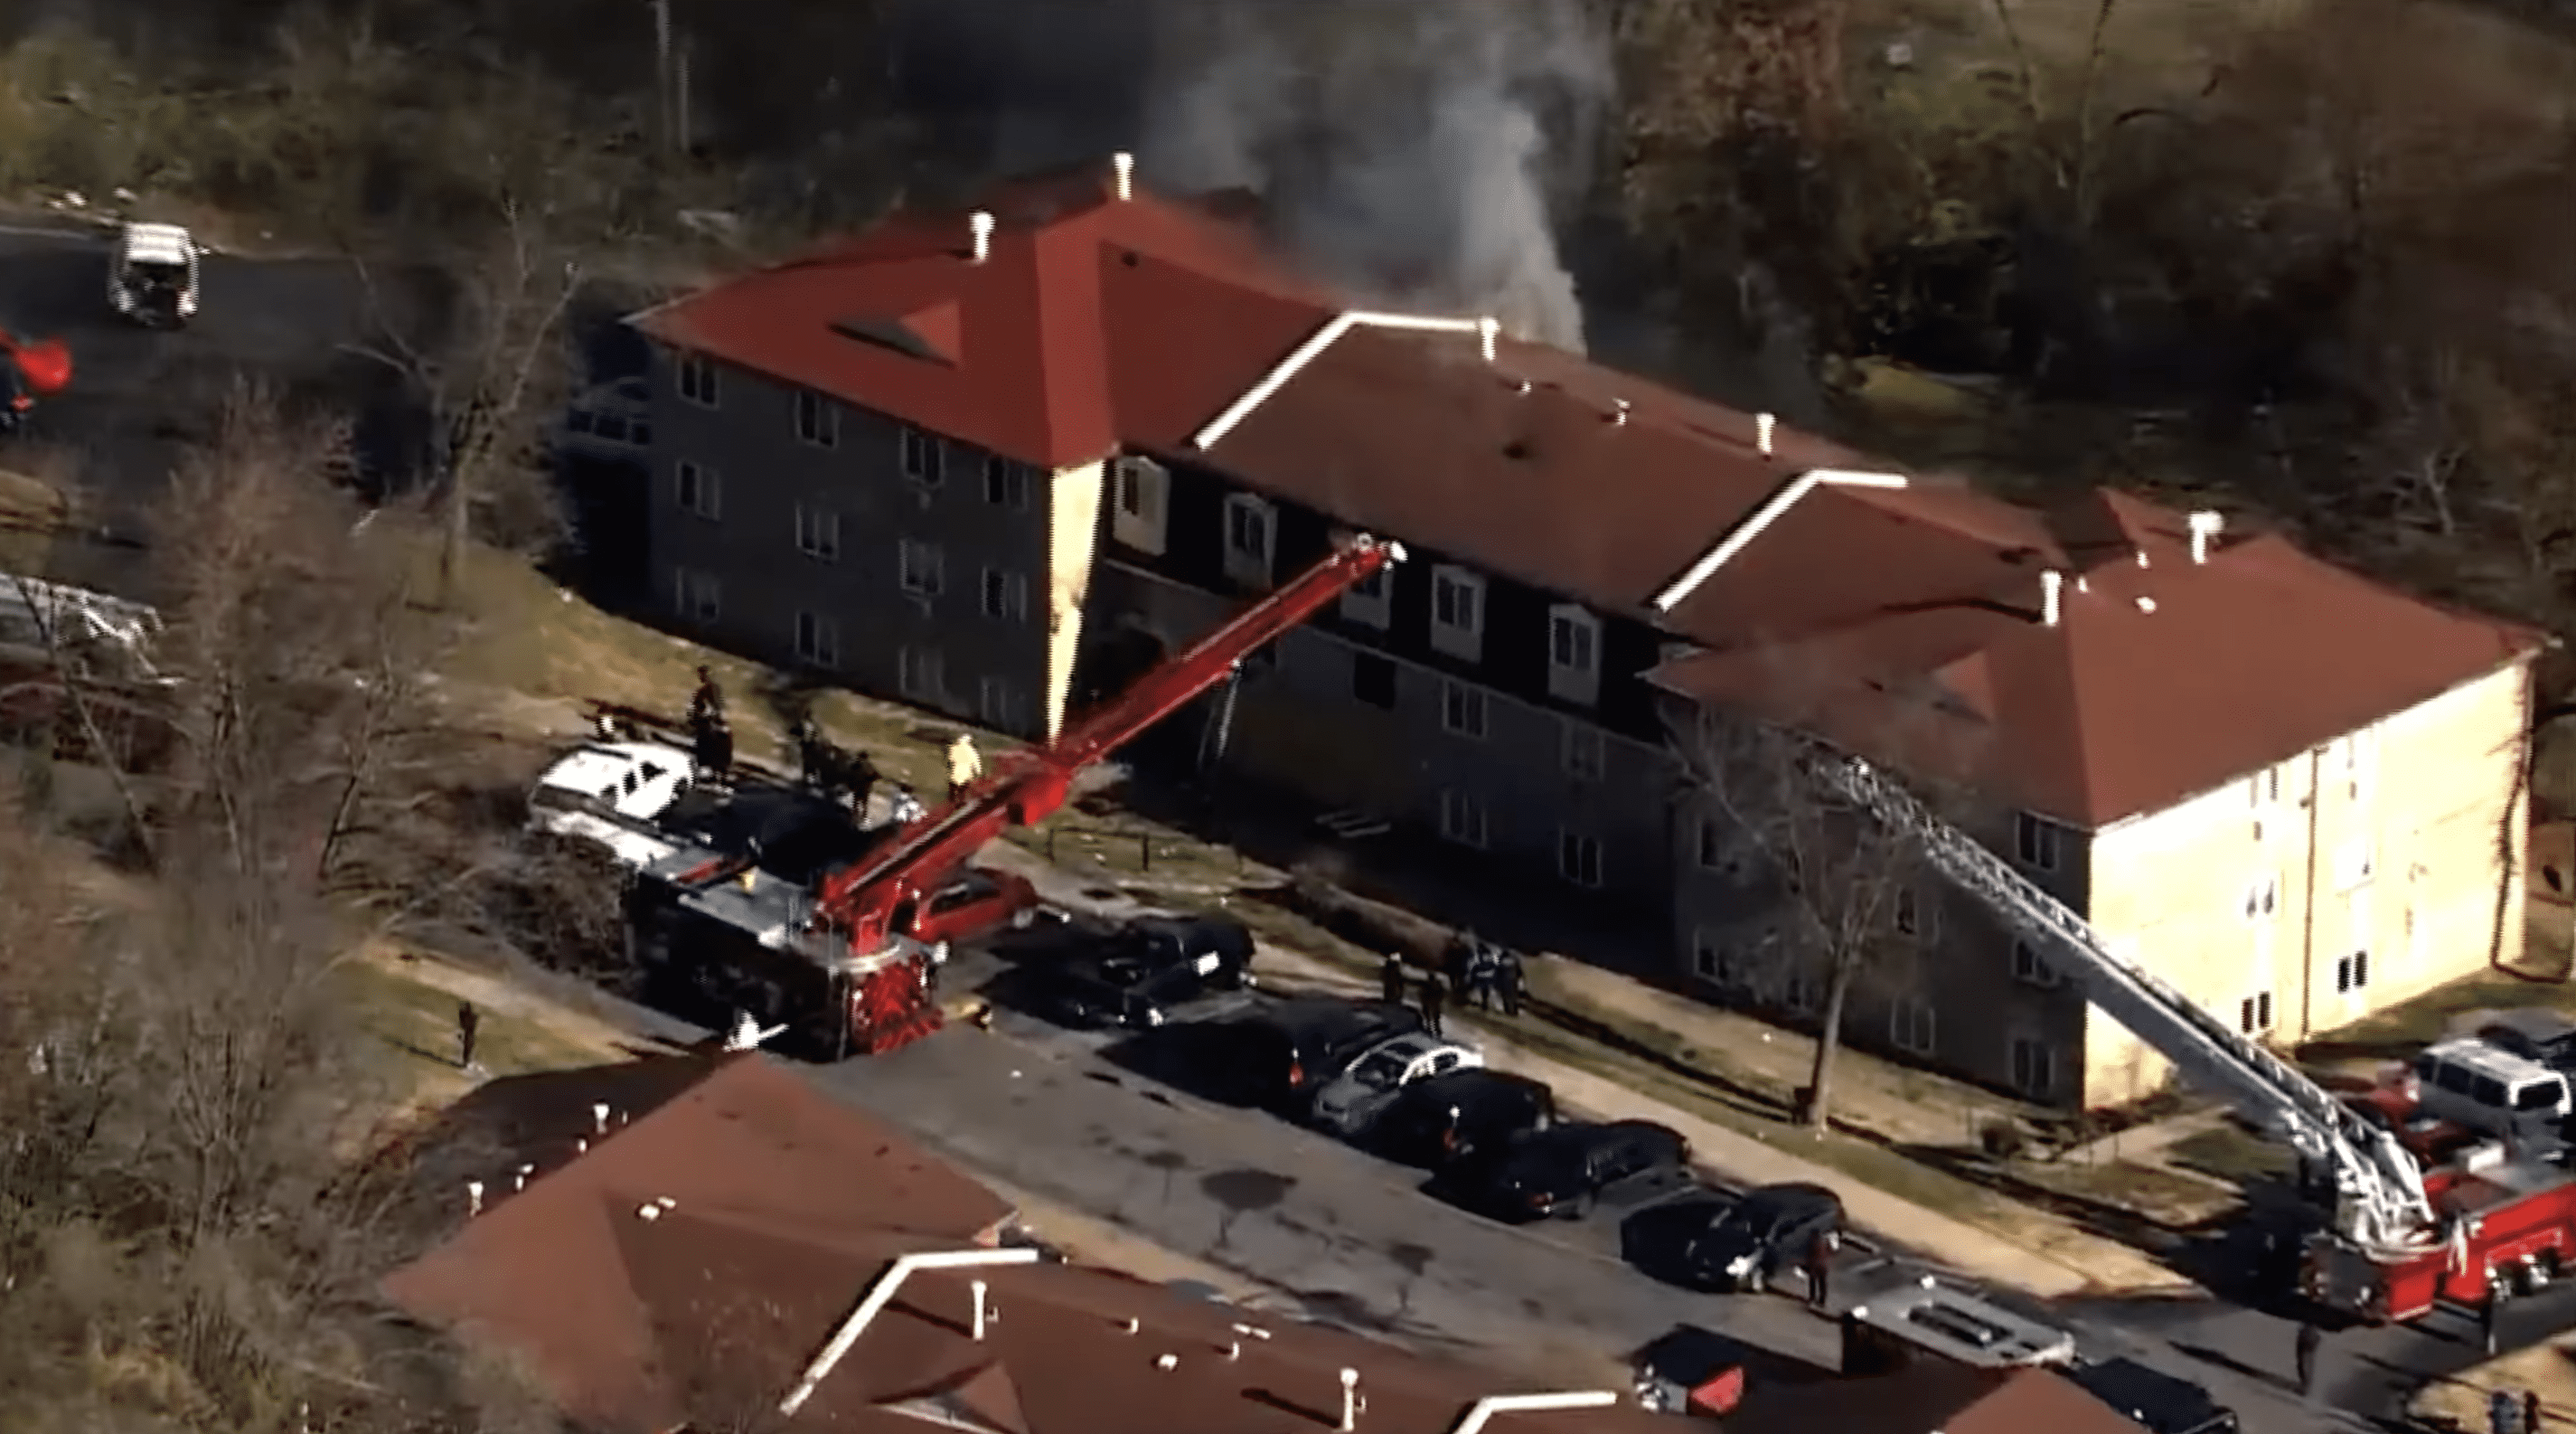 The apartment unit at the Hillvale Apartment complex on Selber Court in north St. Louis that caught fire. | Photo: youtube.com/FOX 2 St. Louis